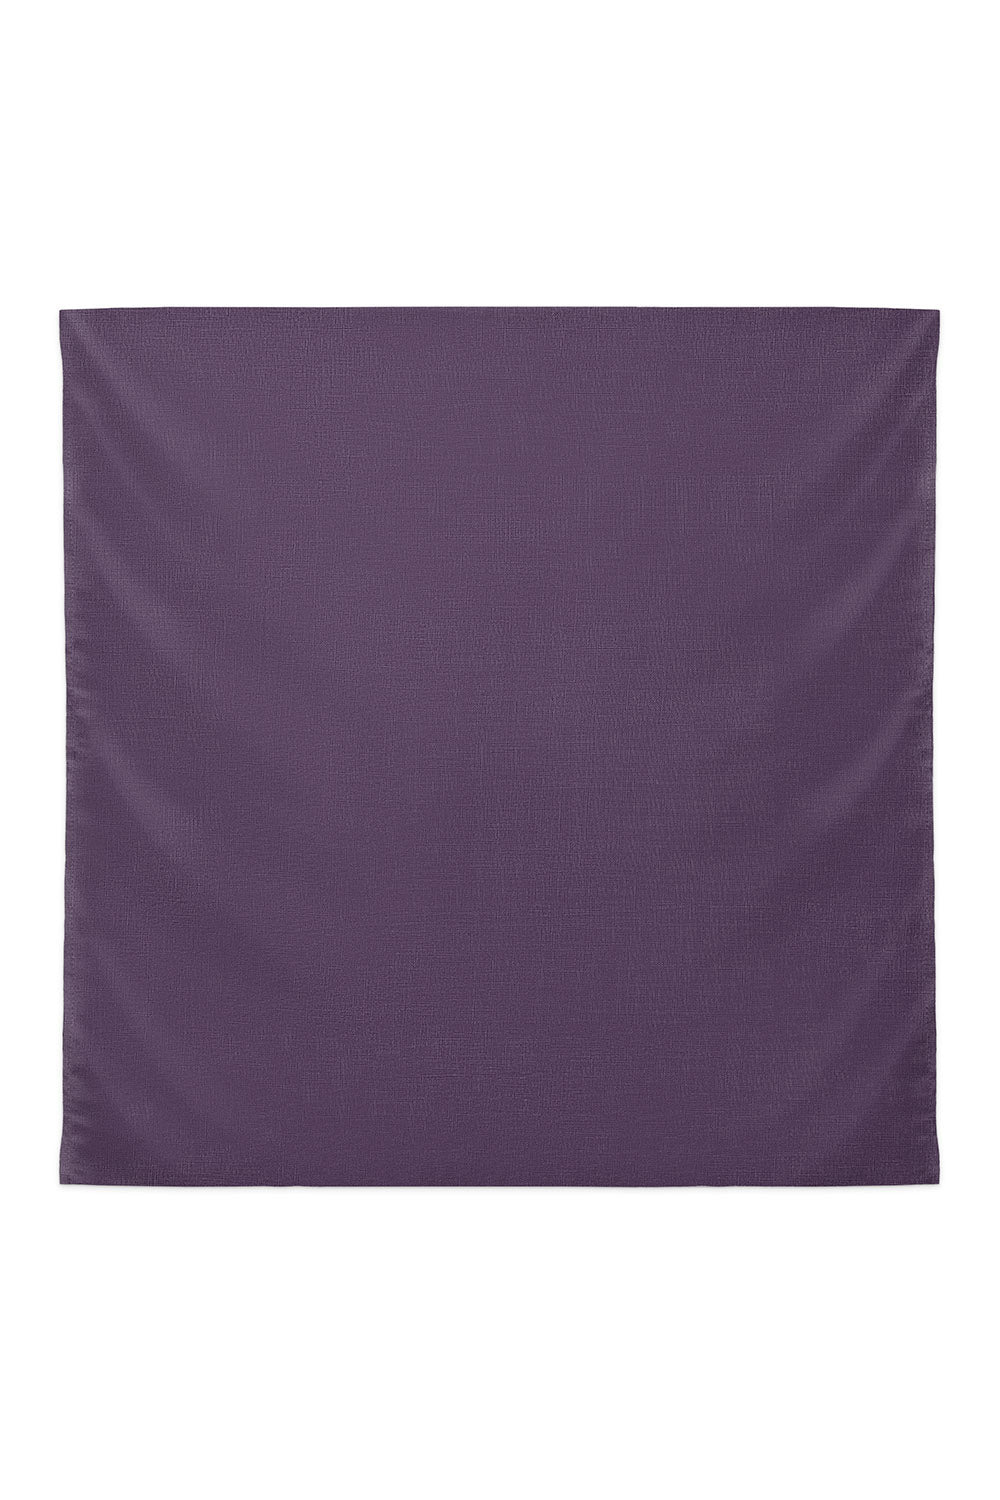 RR Basic Cotton Scarf in Mauve